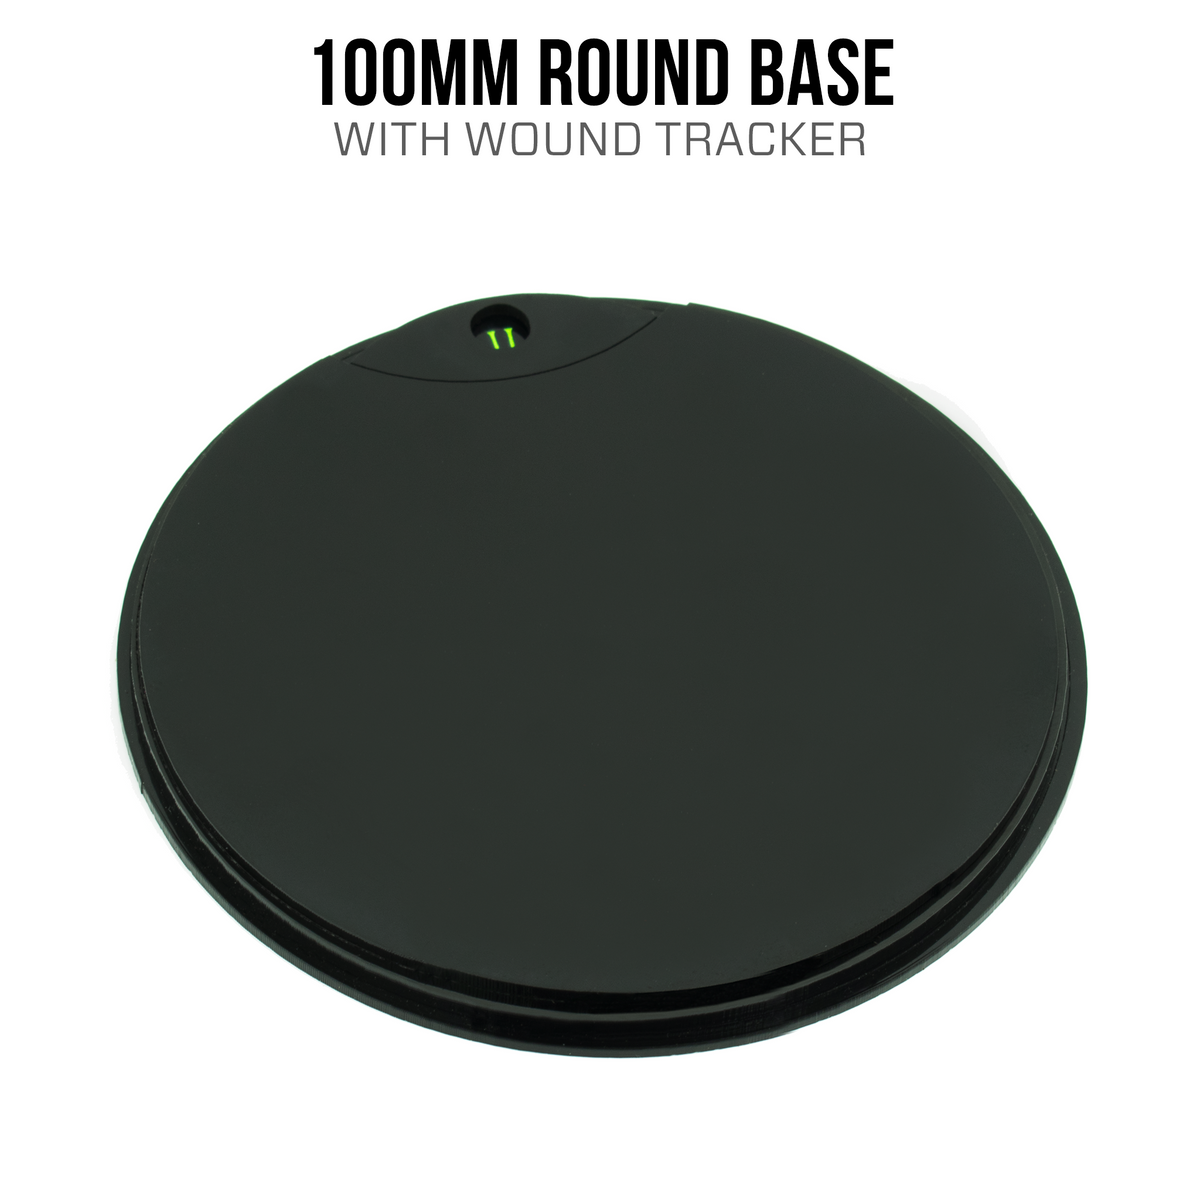 100mm Round Base with Wound Tracker